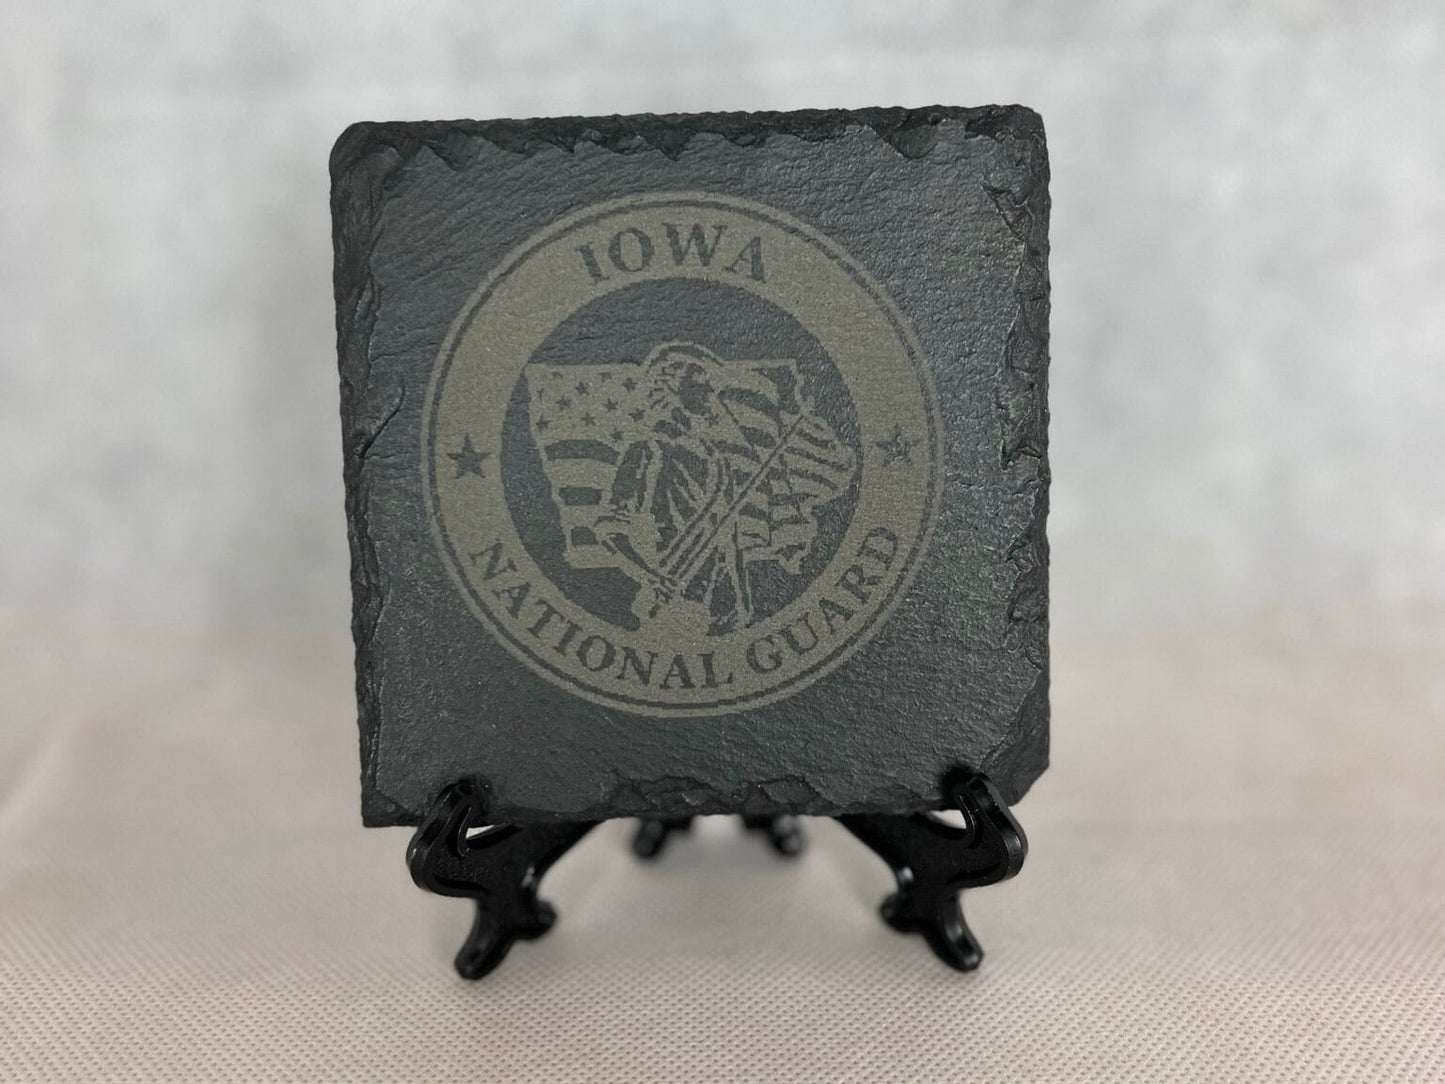 Laser Engraved Slate Coaster with the Iowa National Guard Logo